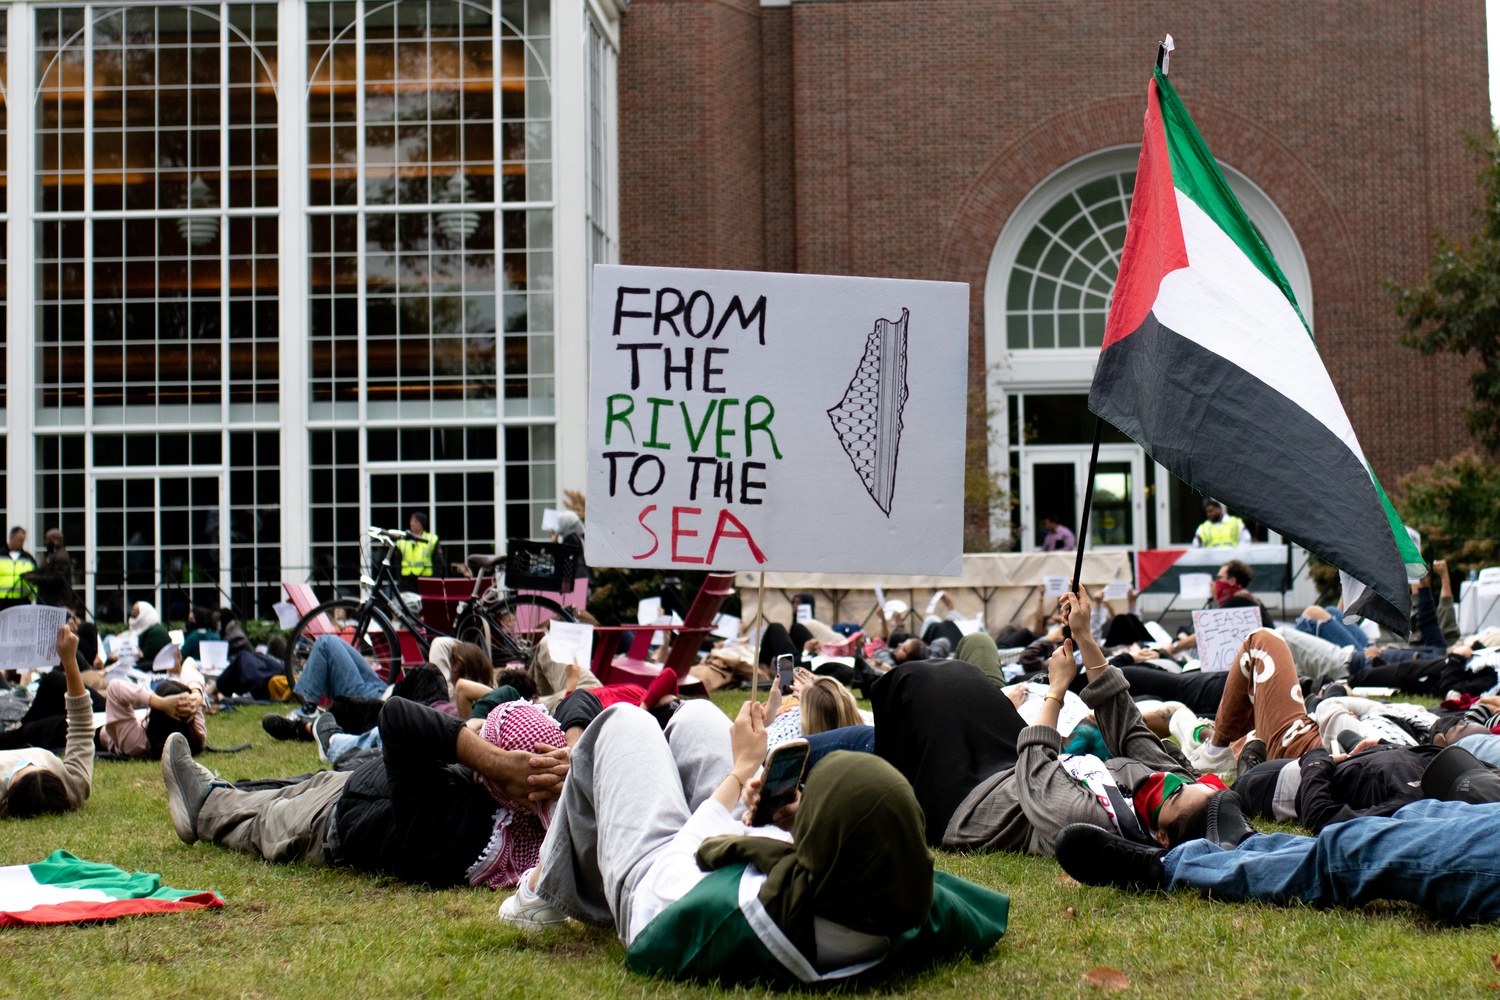 Demonstrators stage a die-in in front of Klarman Hall at HBS on Wednesday to demand an end to violence in Gaza.